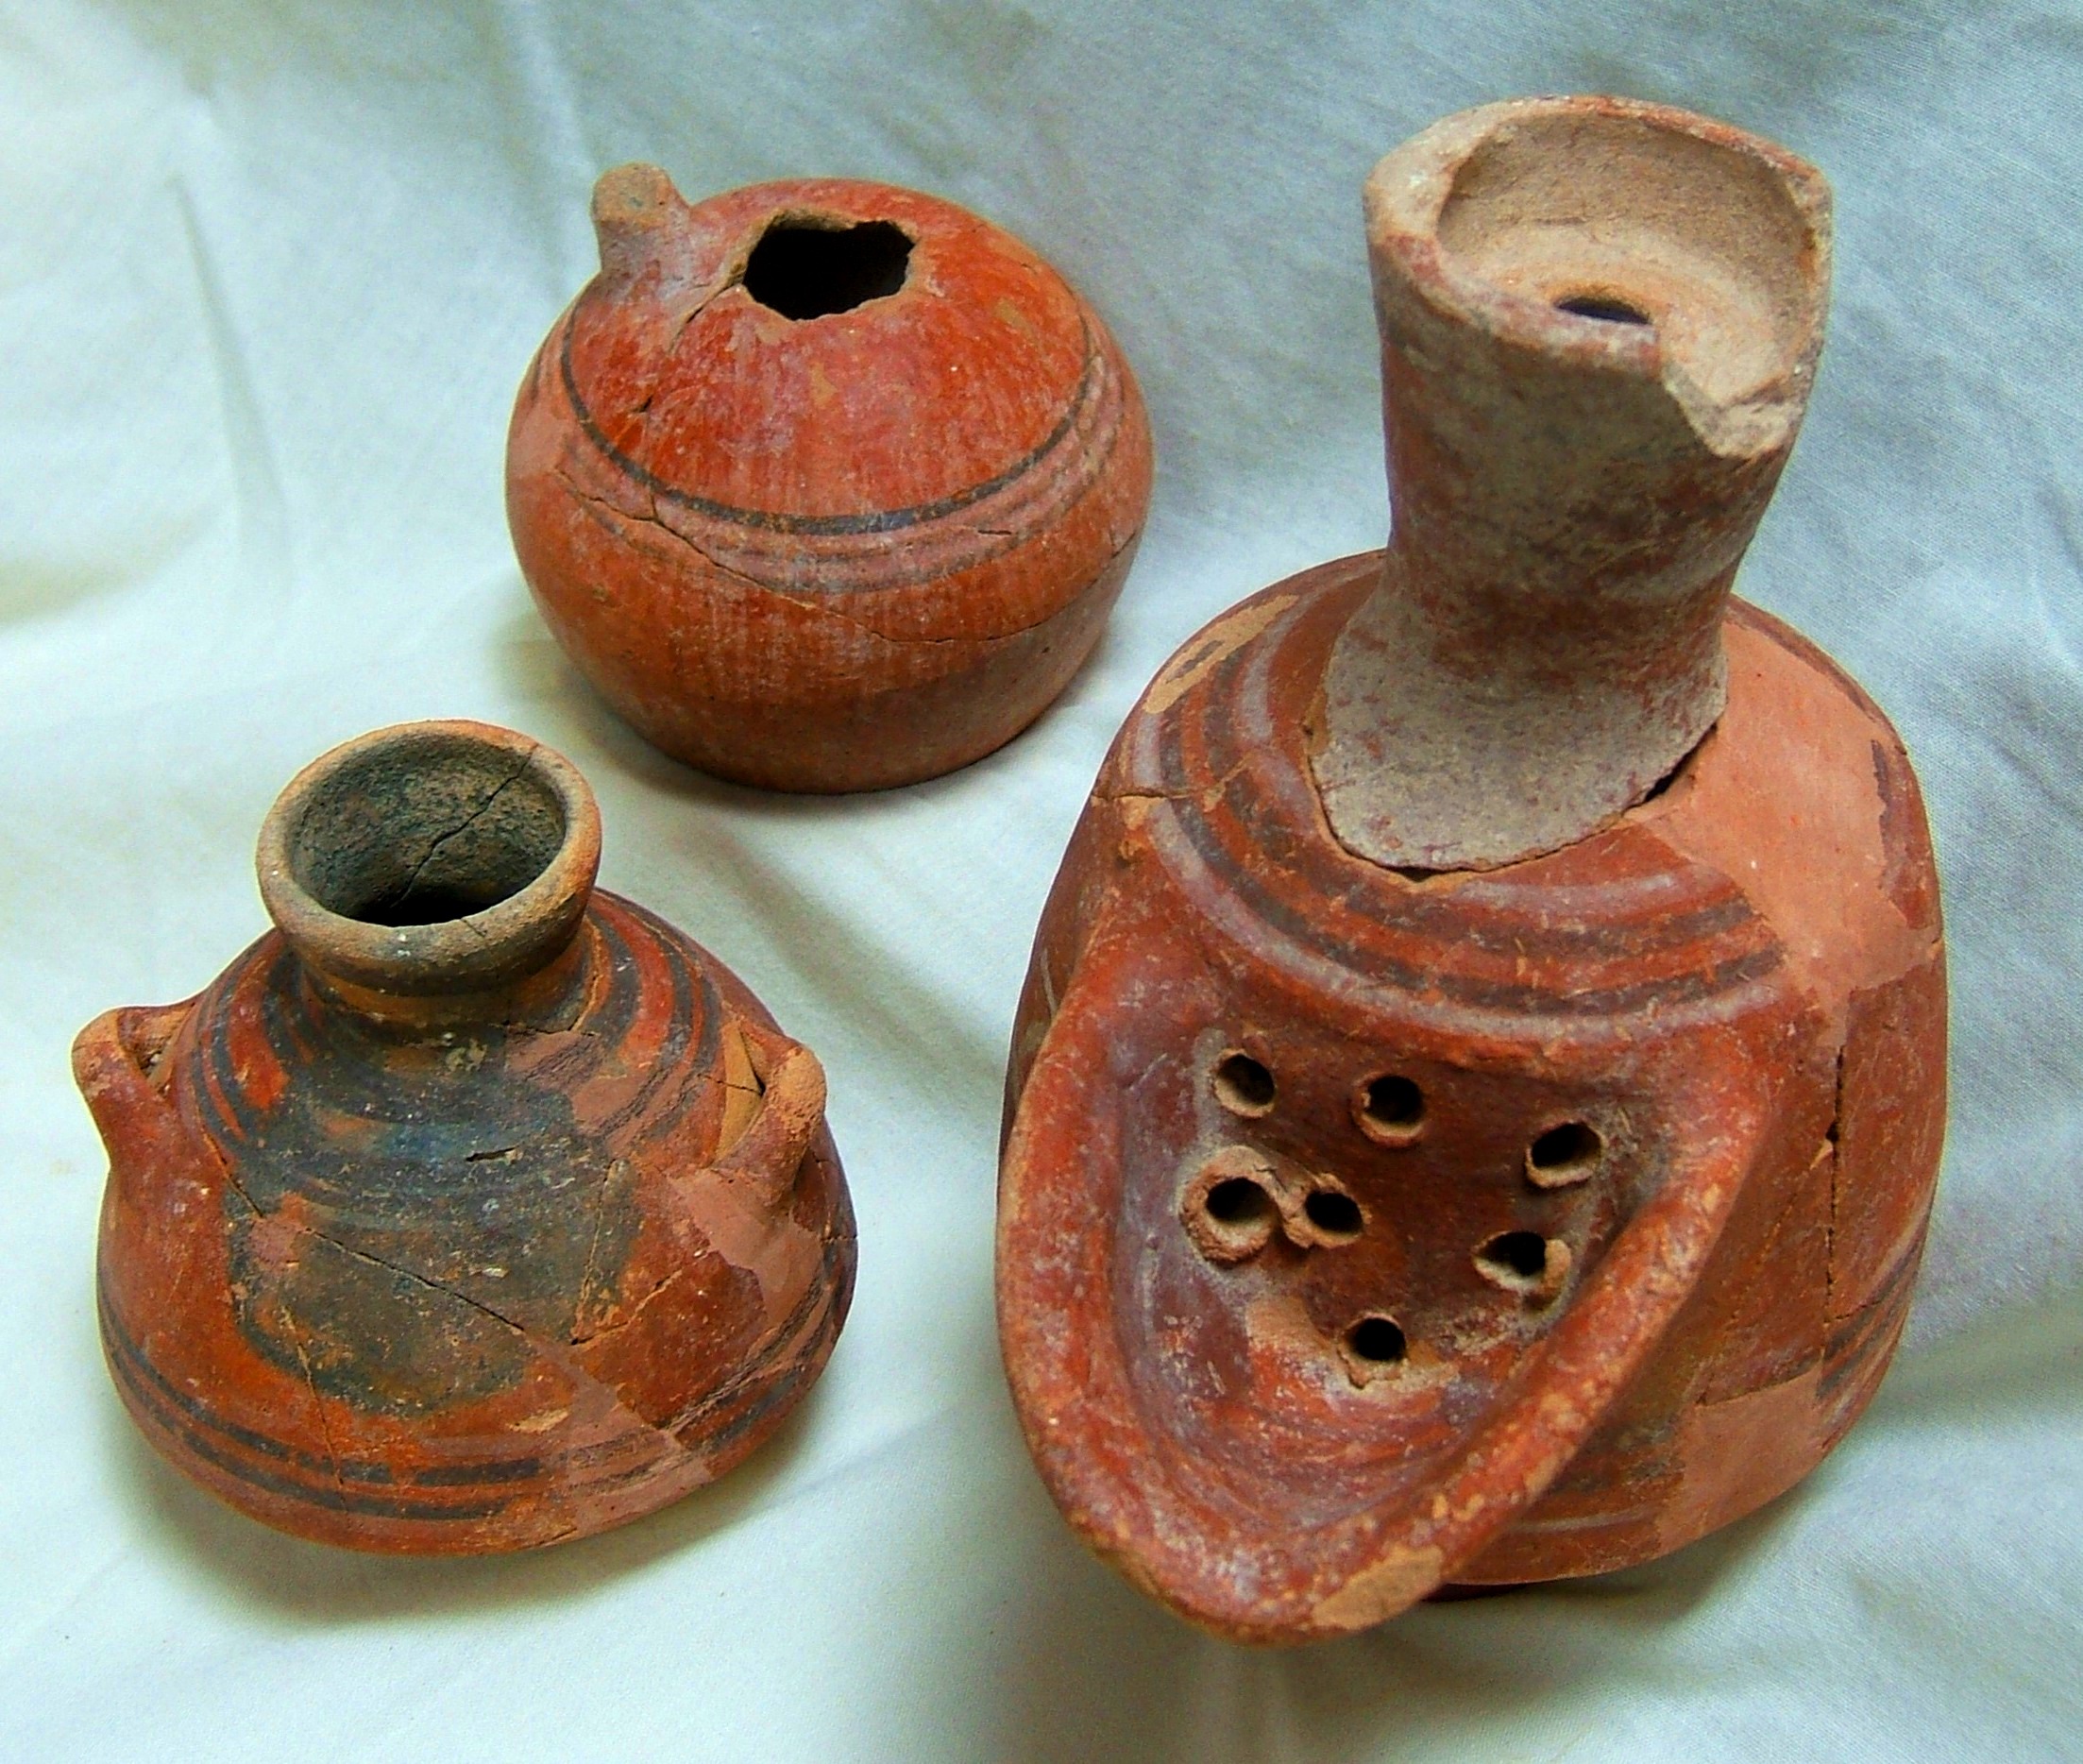 Illustration 7: A variety of red, black and white painted pottery from Khirbet Qeiyafa. The vessels were made in Philistia and were used to transport luxury items such as perfumes or medicines. (Photo courtesy of the excavation expedition)